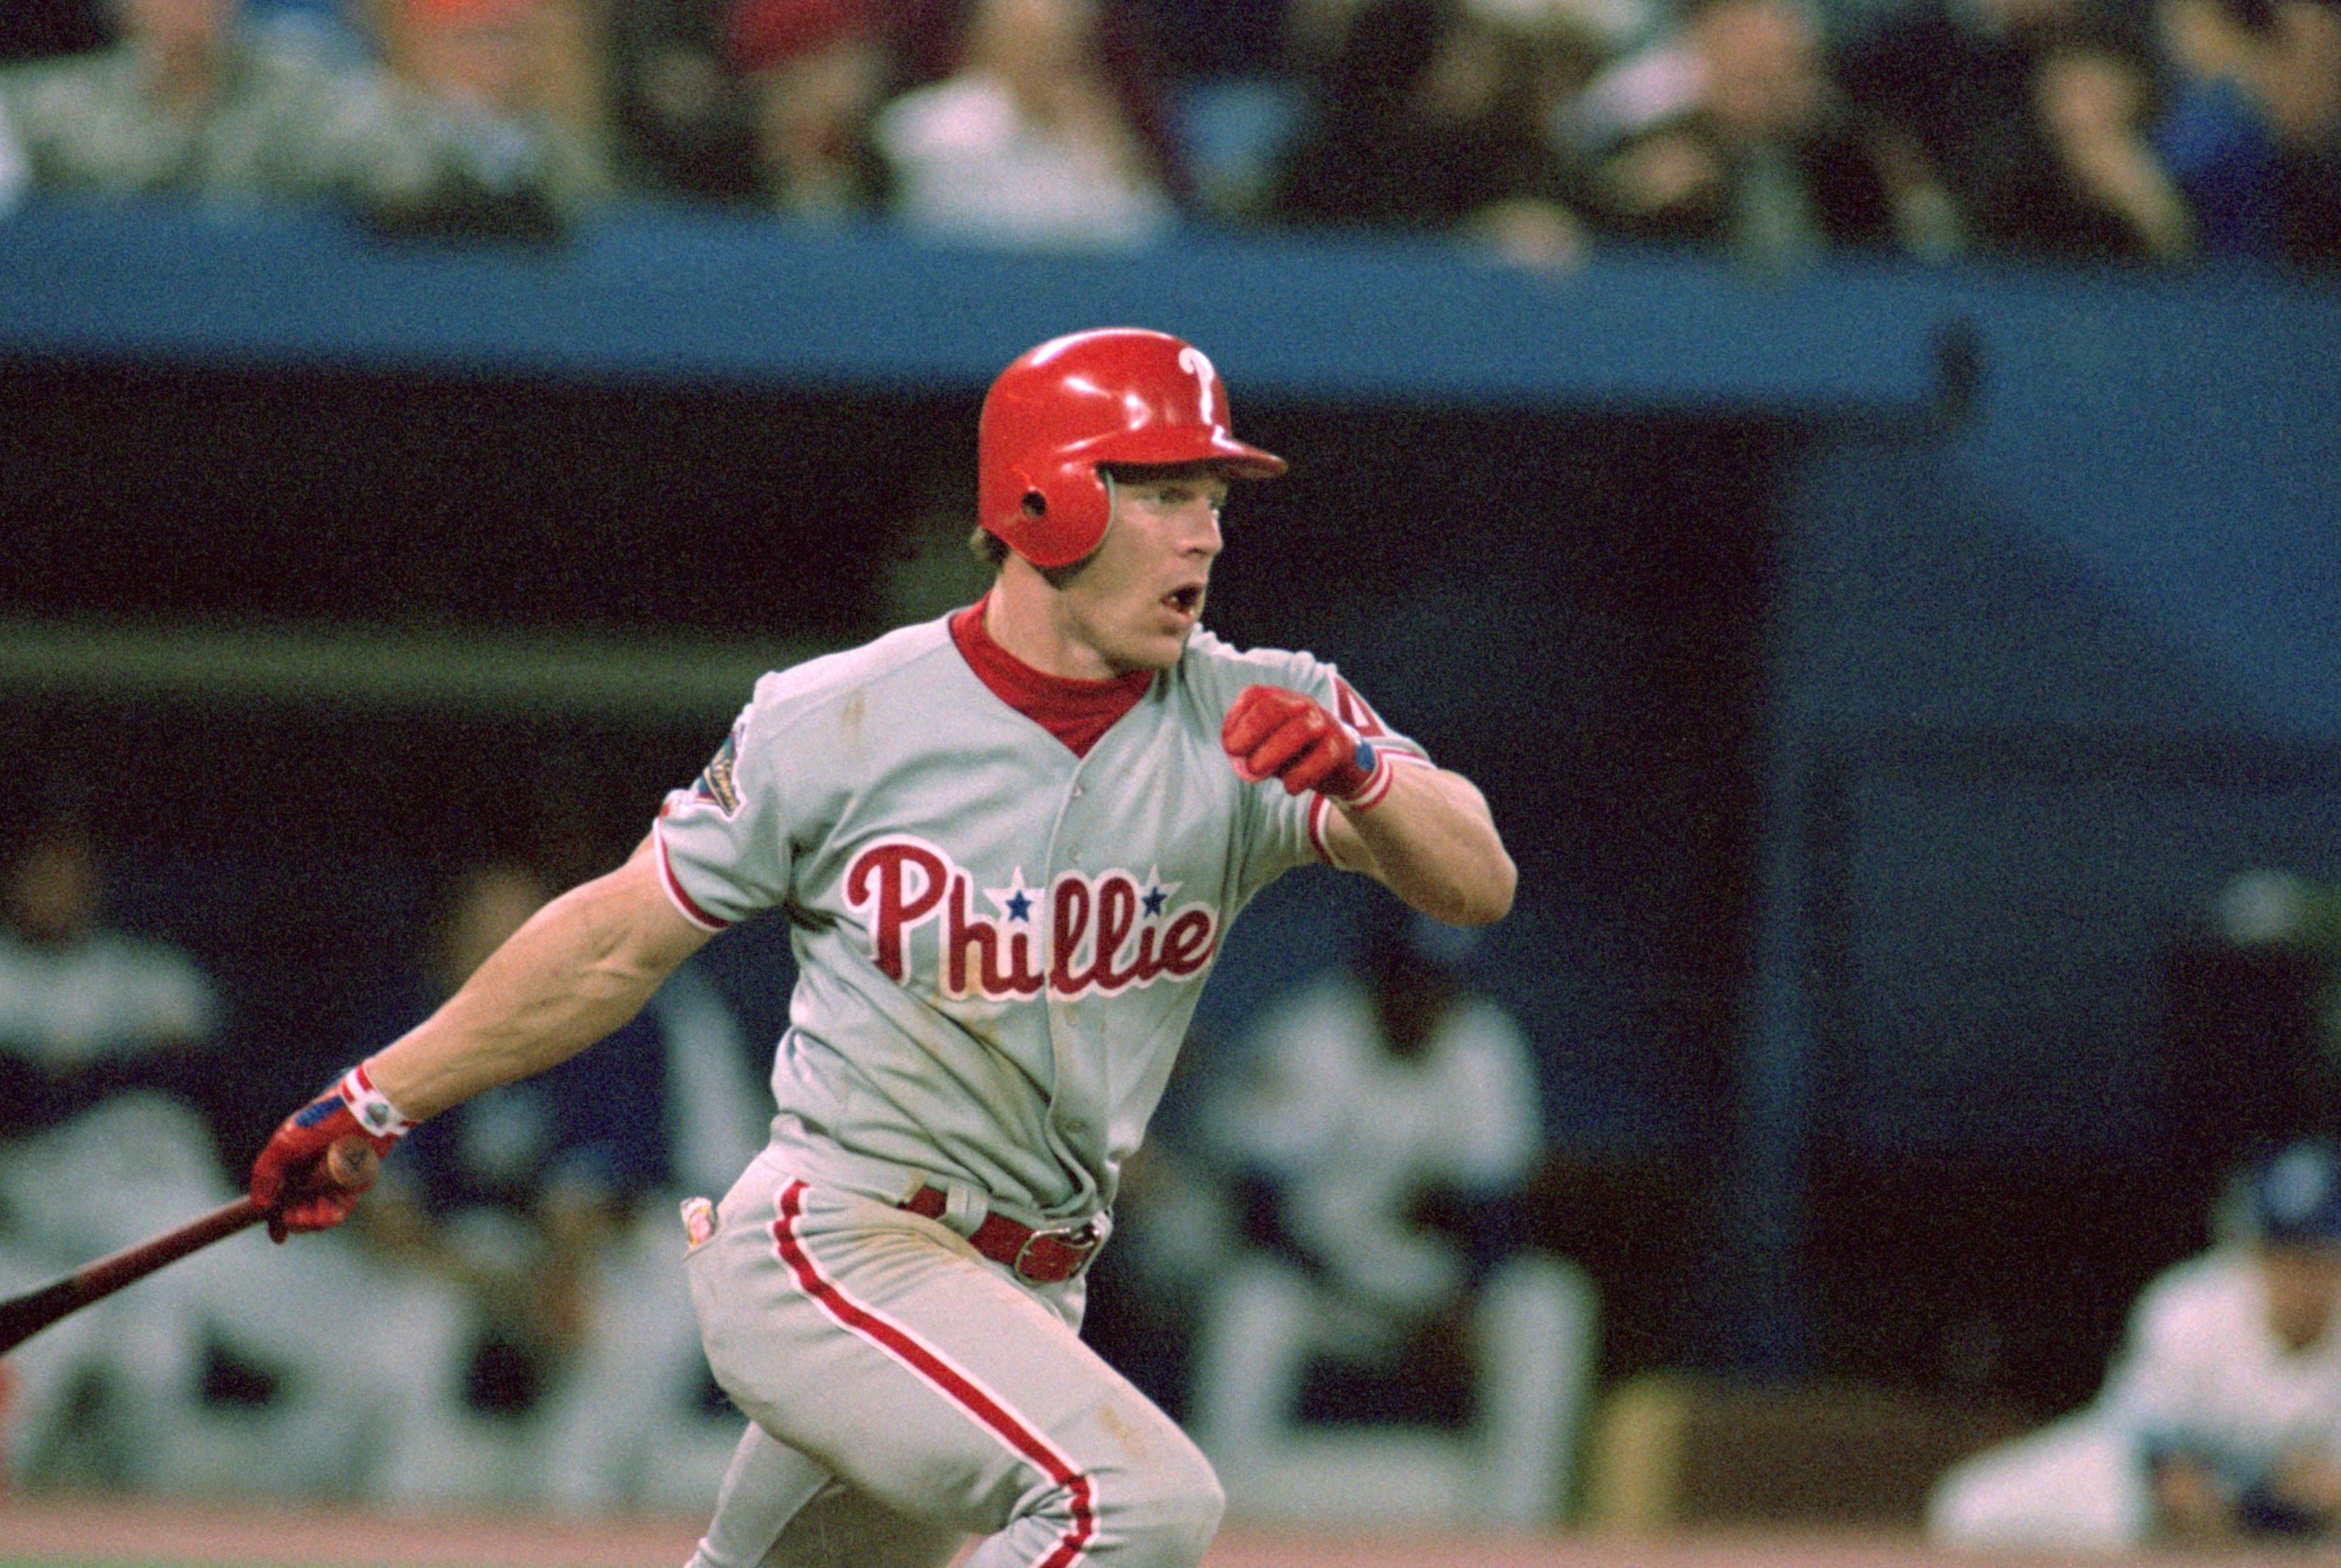 TORONTO - OCTOBER 17: Lenny Dykstra #4 of the Philadelphia Phillies swings at a pitch during Game two of the 1993 World Series against the Toronto Blue Jays at Skydome on October 17, 1993 in Toronto, Ontario, Canada. The Phillies defeated the Blue Jays 6-4. Rick Stewart/Getty Images